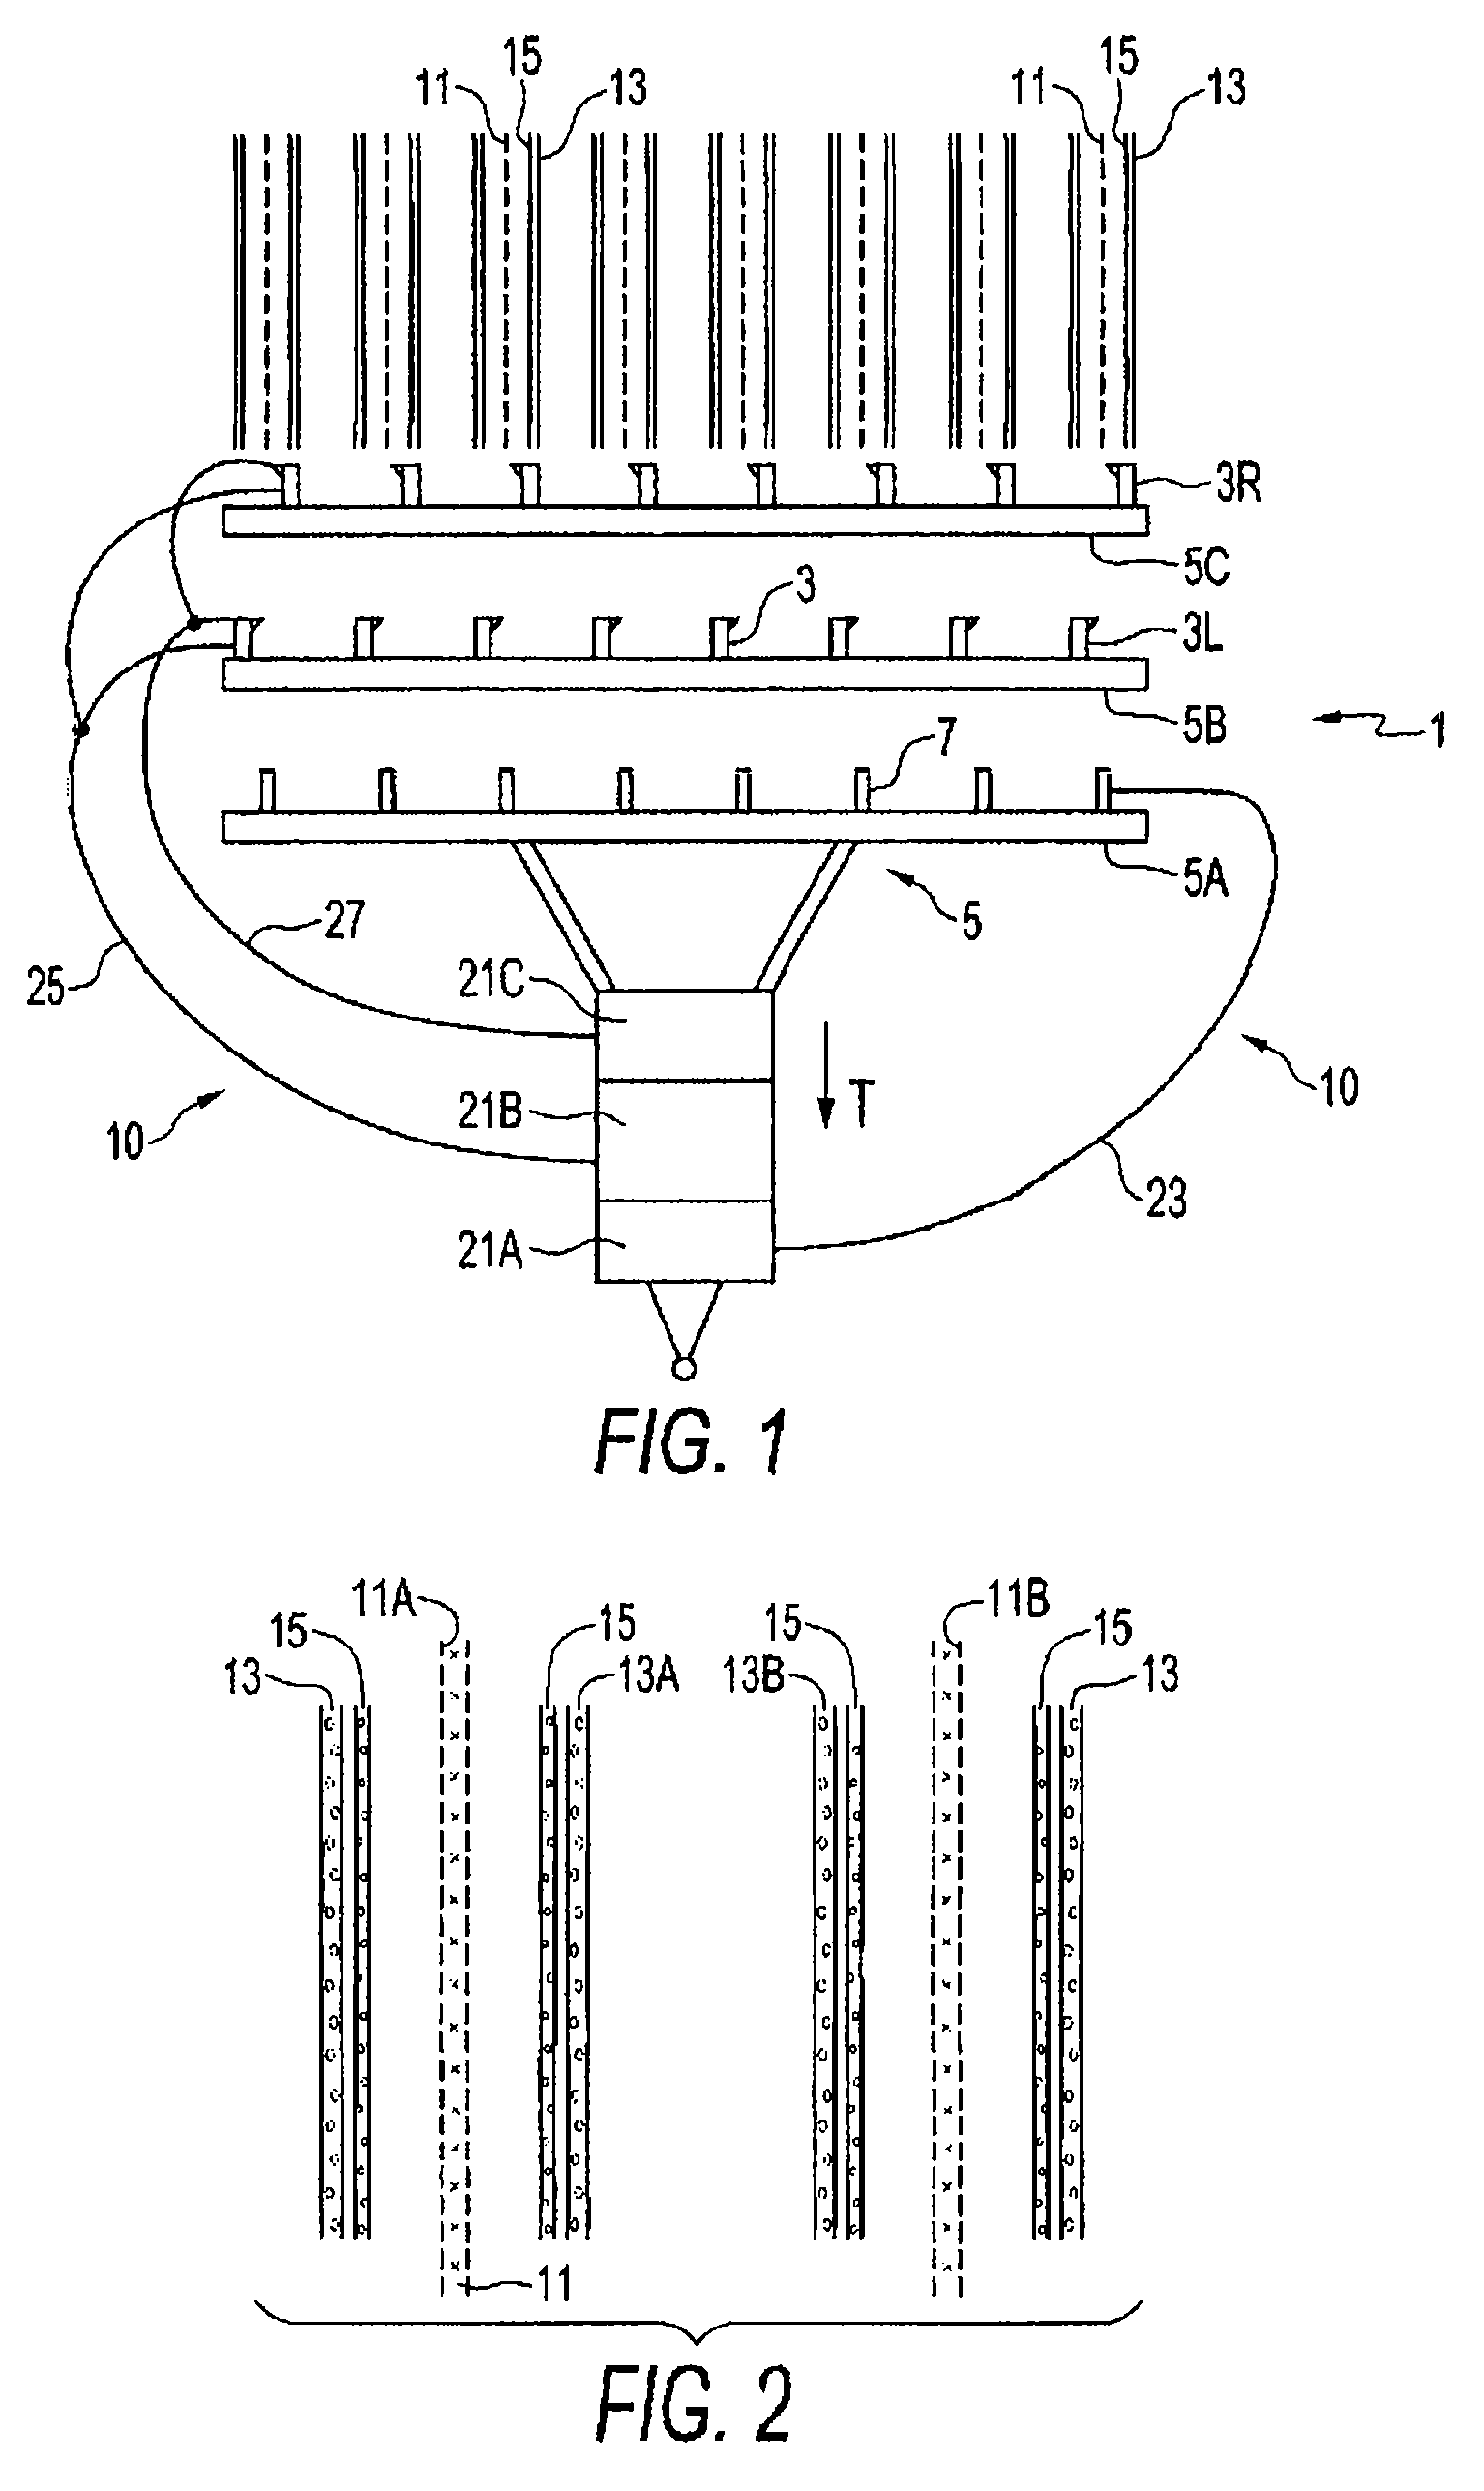 Method and apparatus for seeding canola and flax